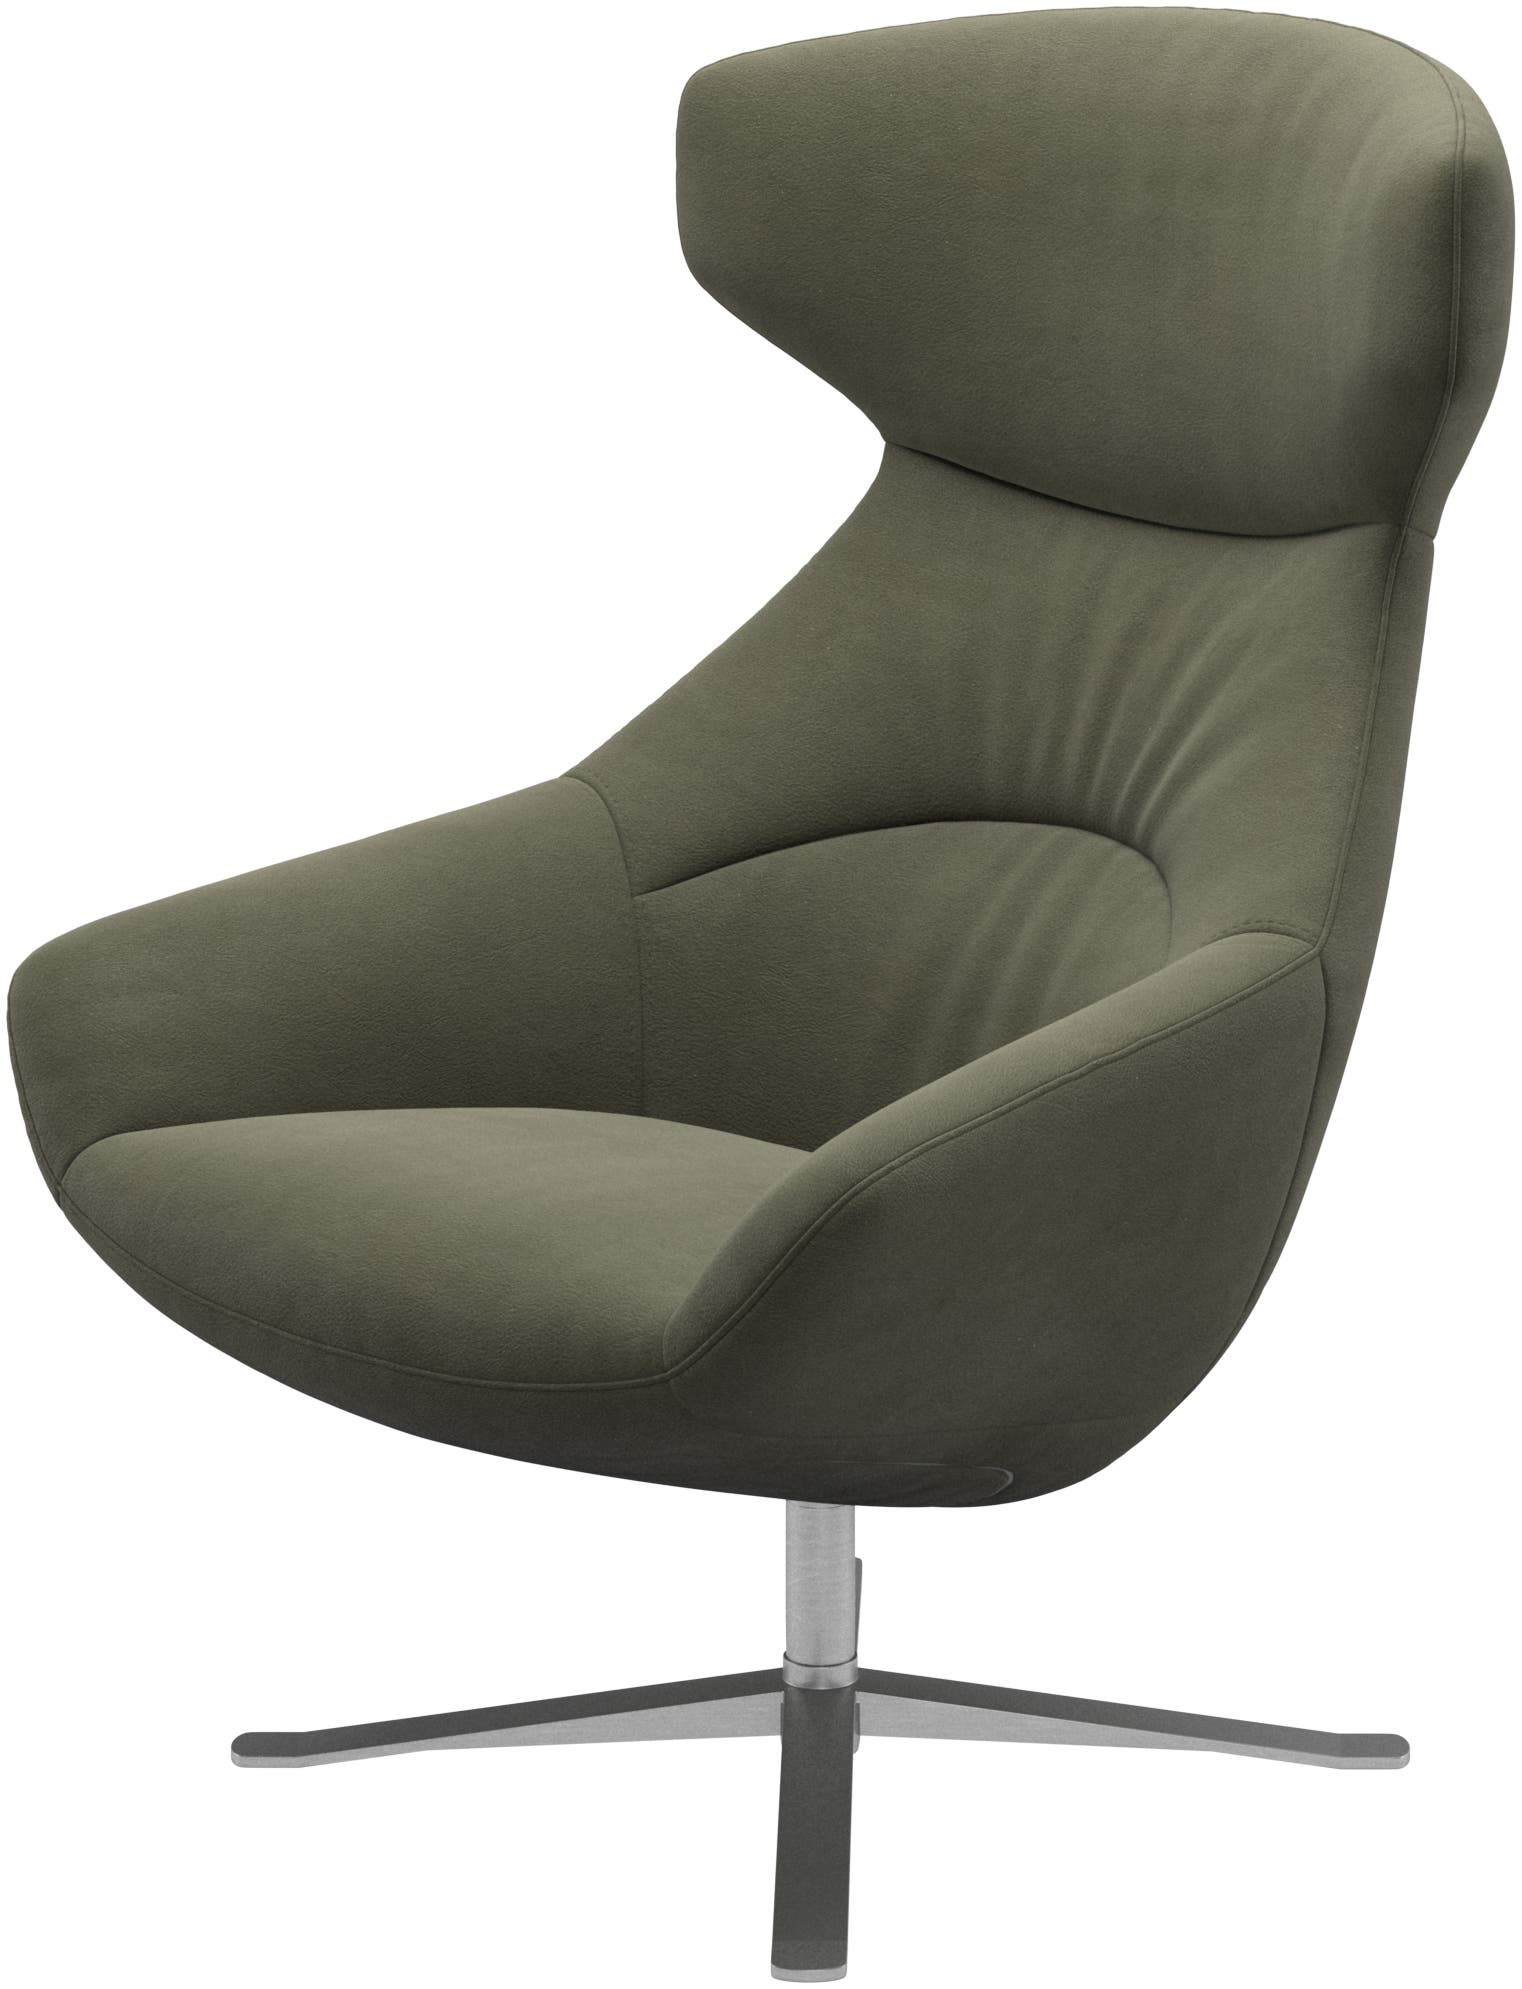 Porto chair with swivel function